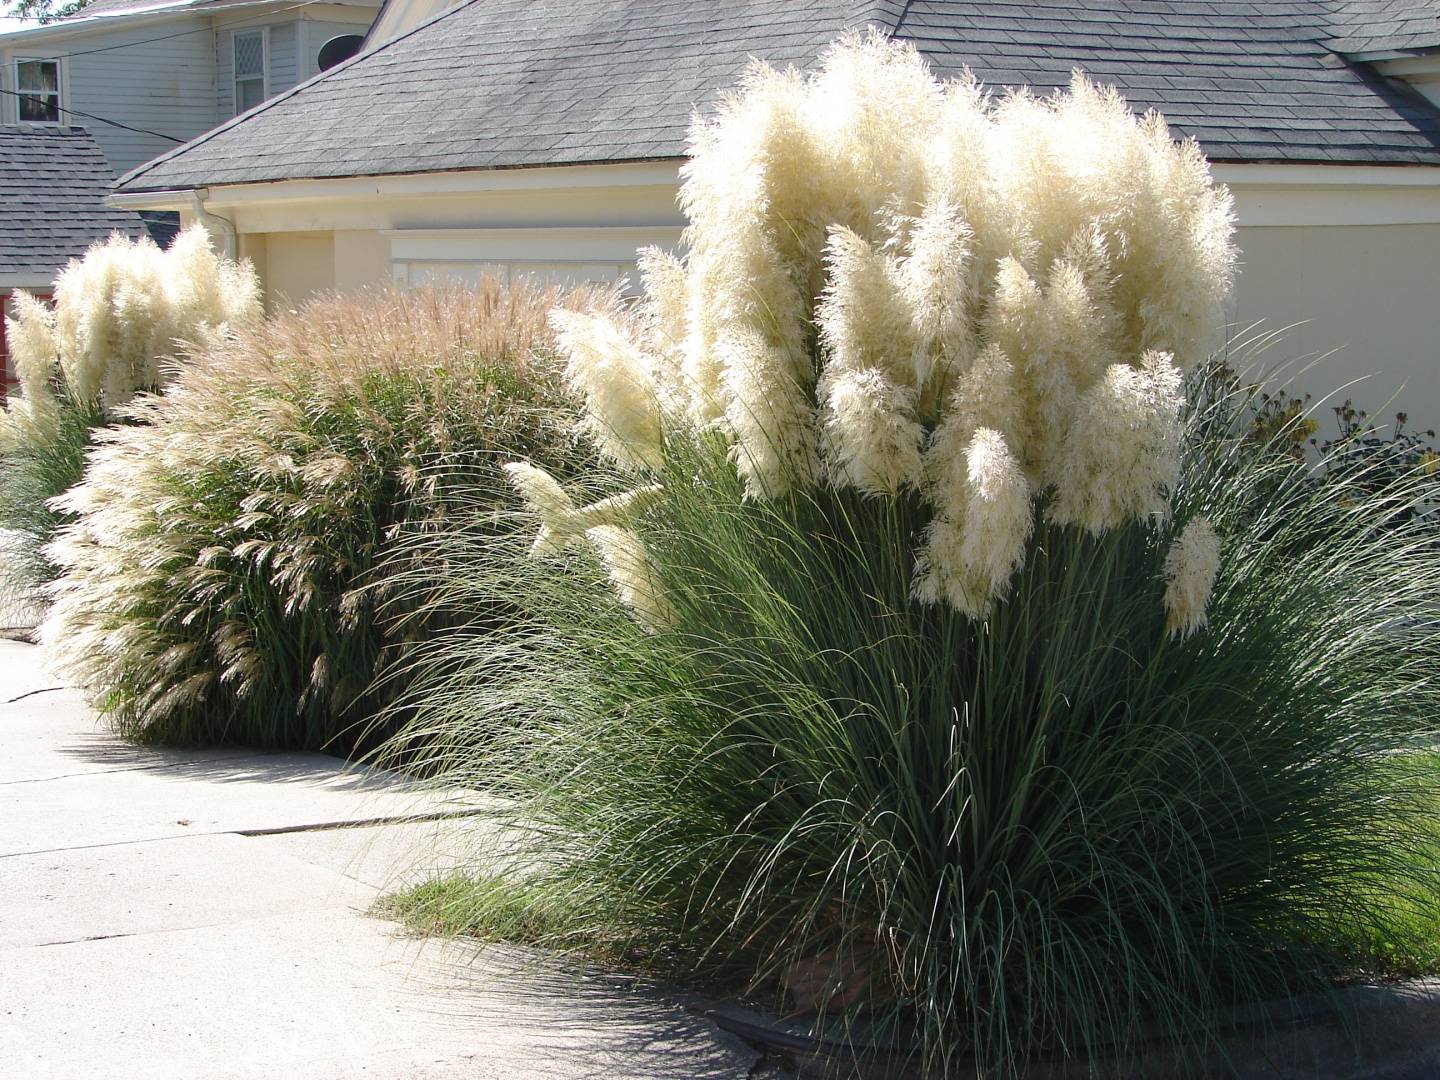 How to propagate pampas grass?